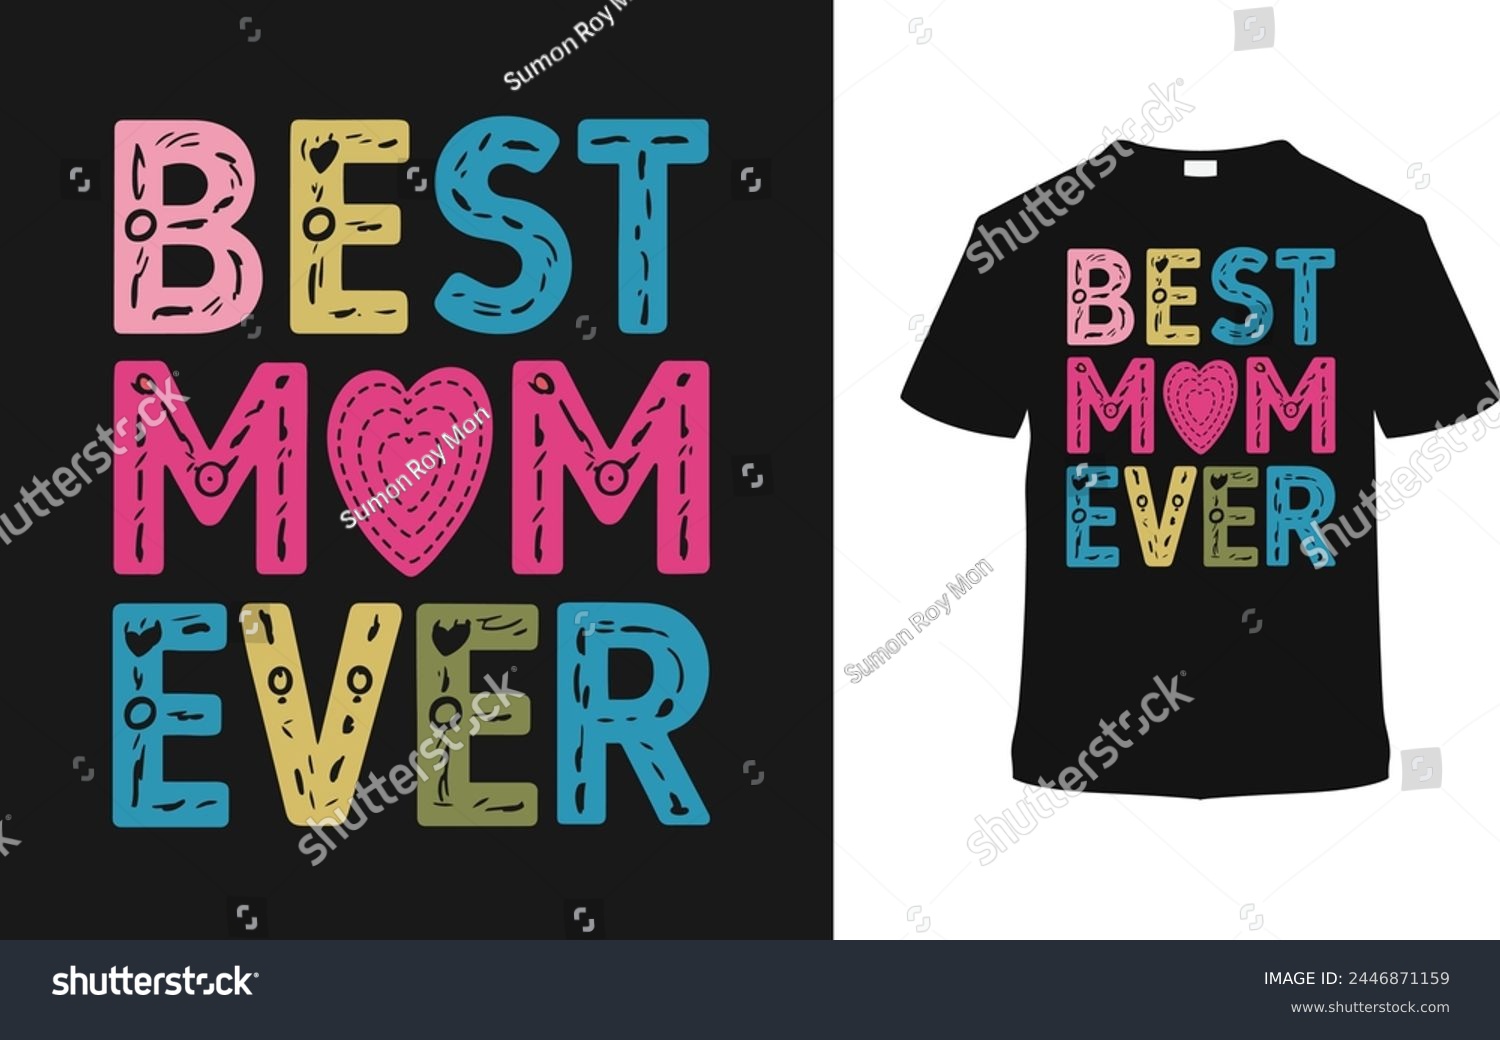 SVG of Best Mom Ever Mother's Day T shirt Design, vector illustration, graphic template, print on demand, typography, vintage, eps 10, textile fabrics, retro style, element, apparel, mother t-shirt, mom tee svg